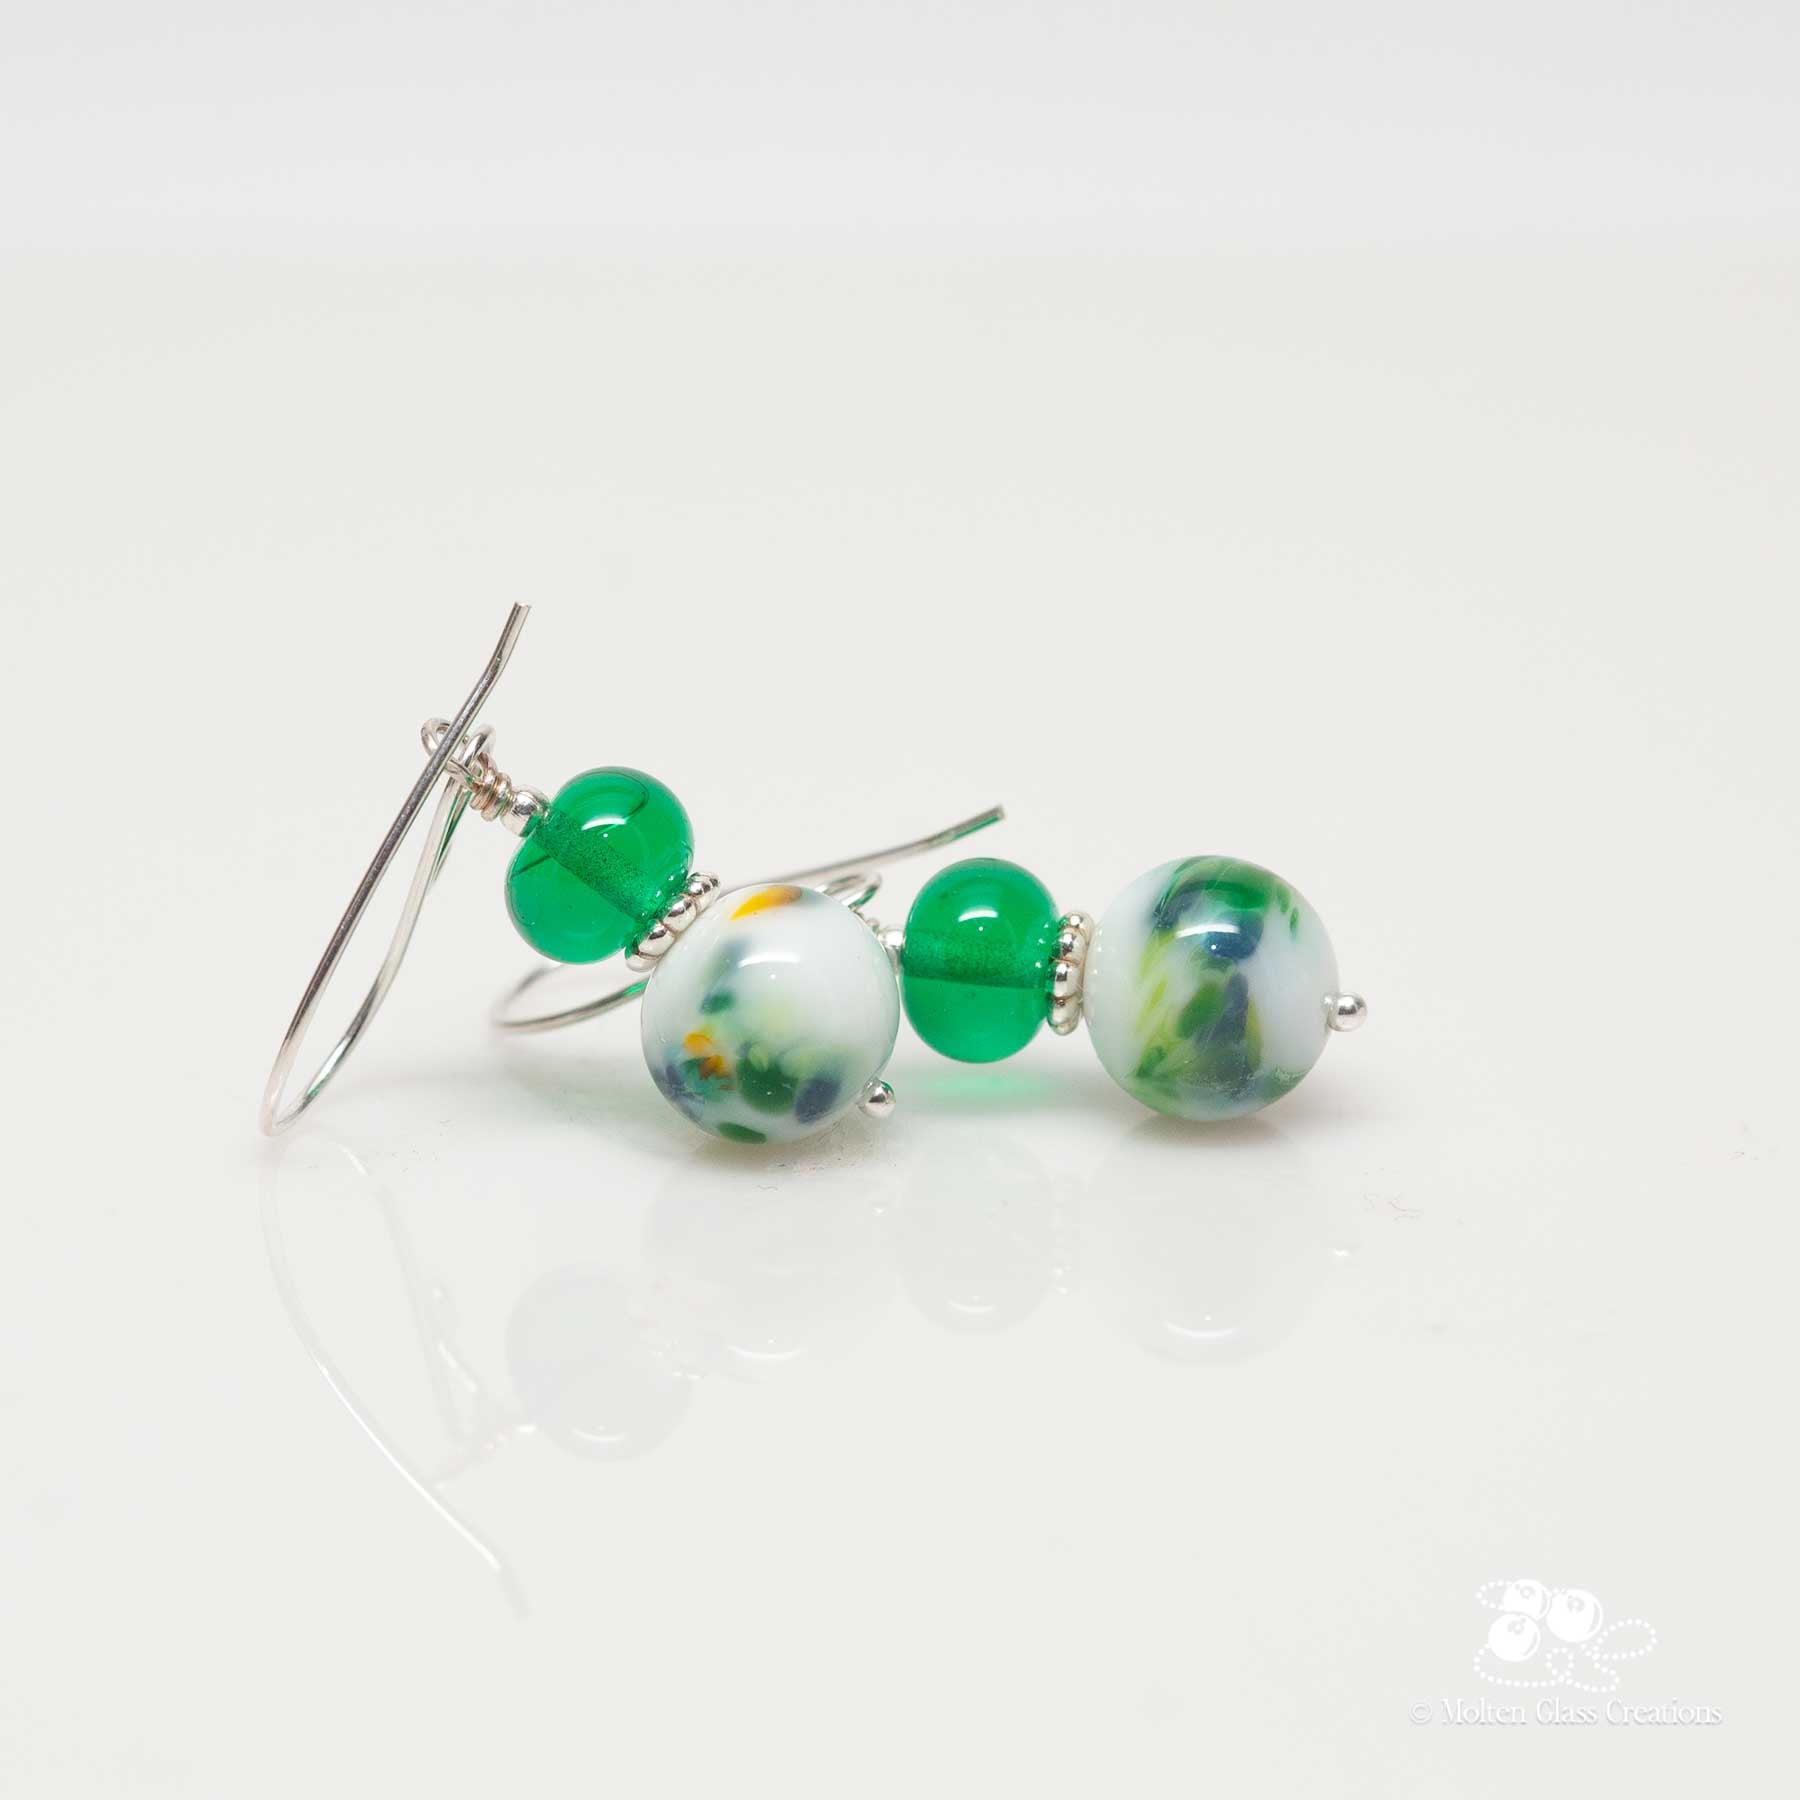 earrings with a green marble style look